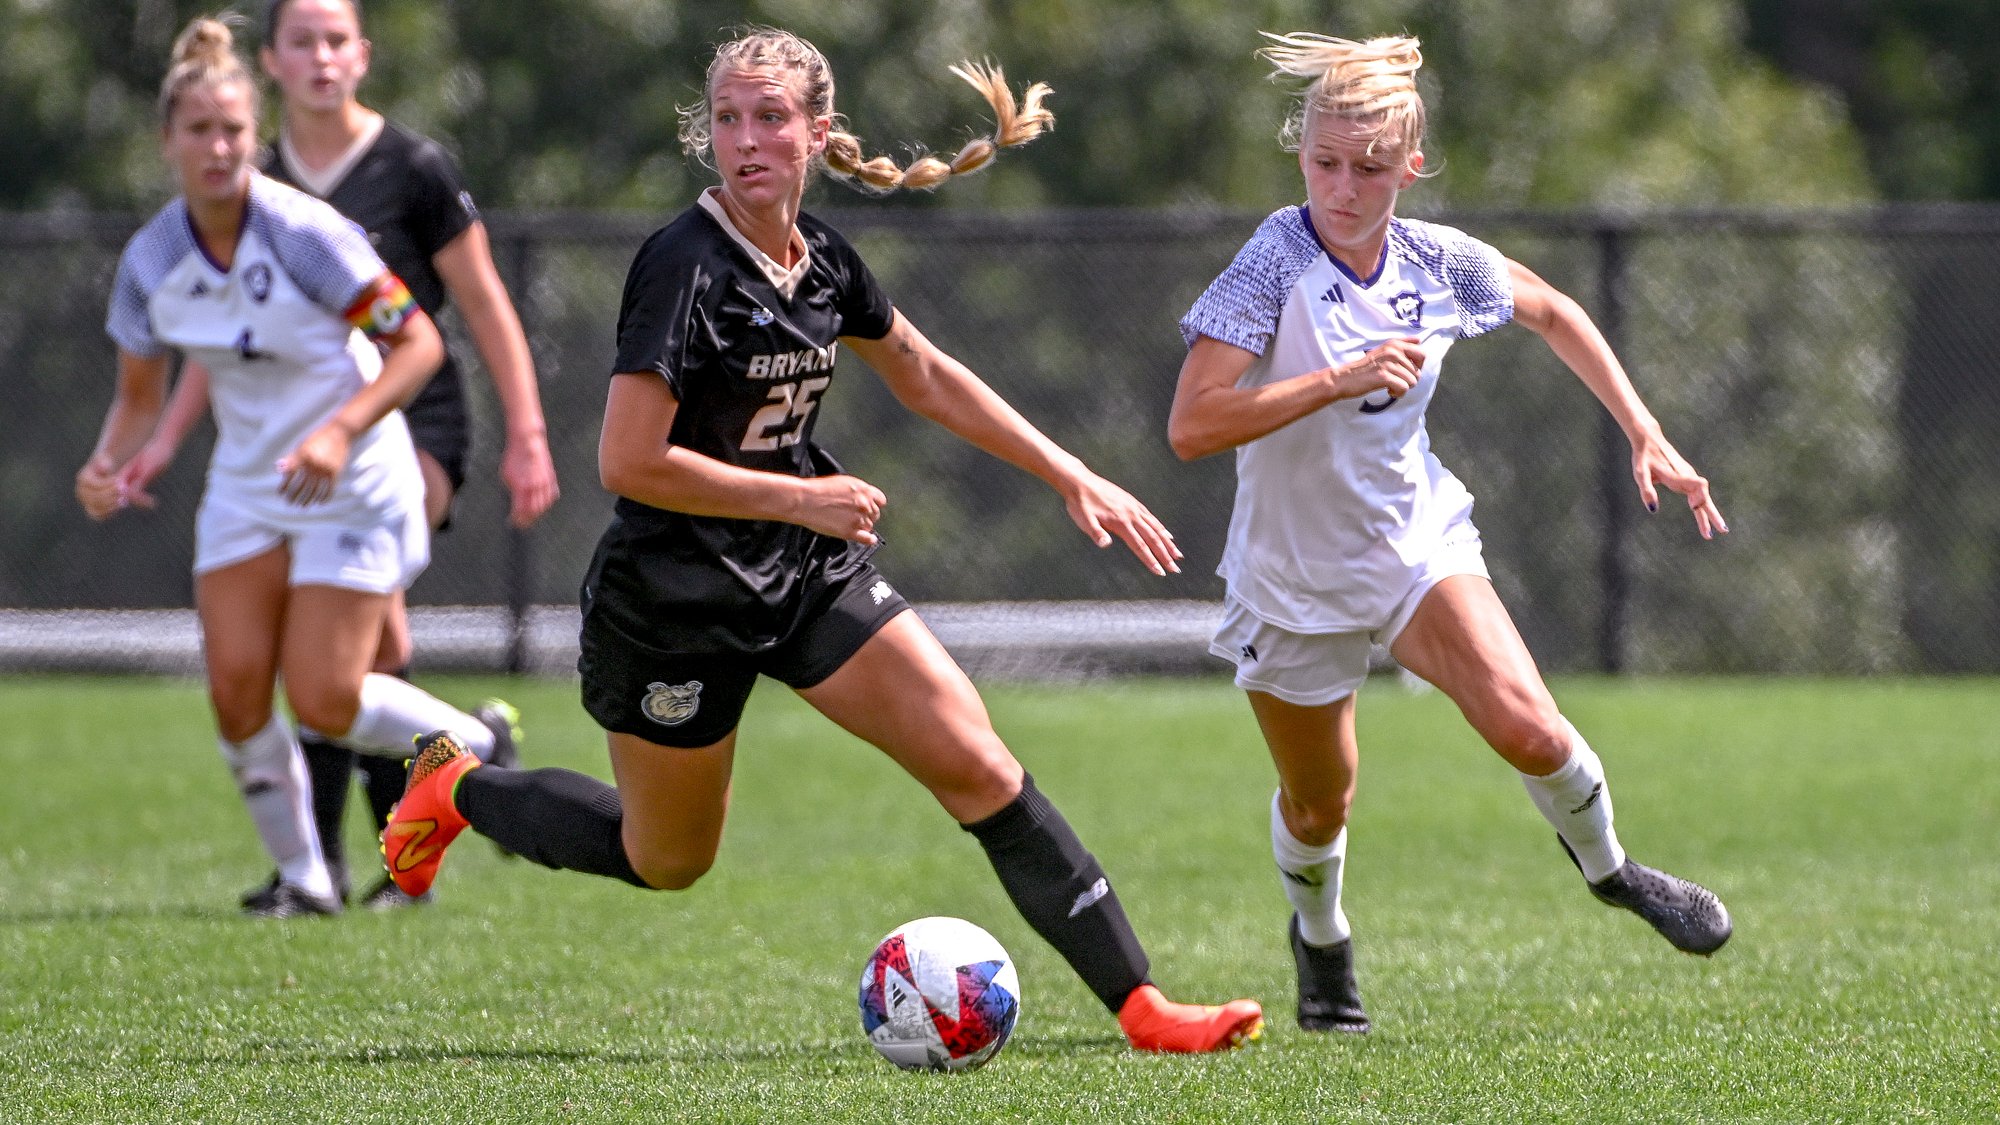 Dawgs rise above Stonehill in 2-0 win